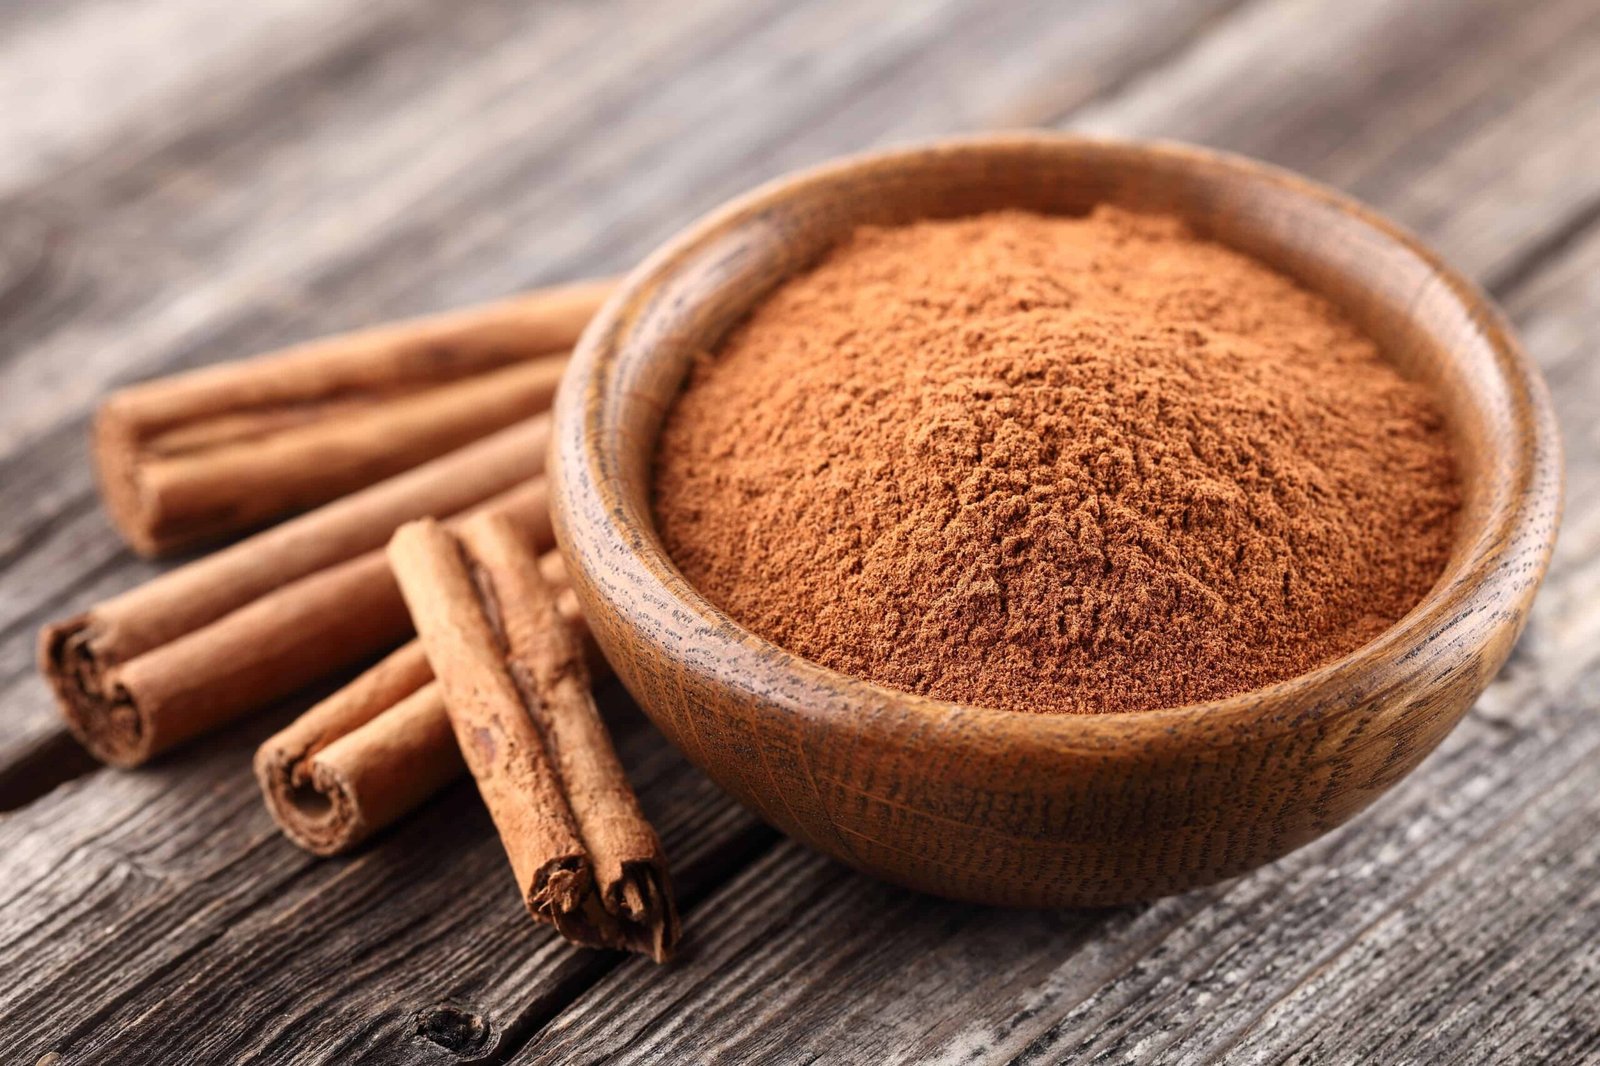 WHAT IS CINNAMON AND HOW DO I USE IT?